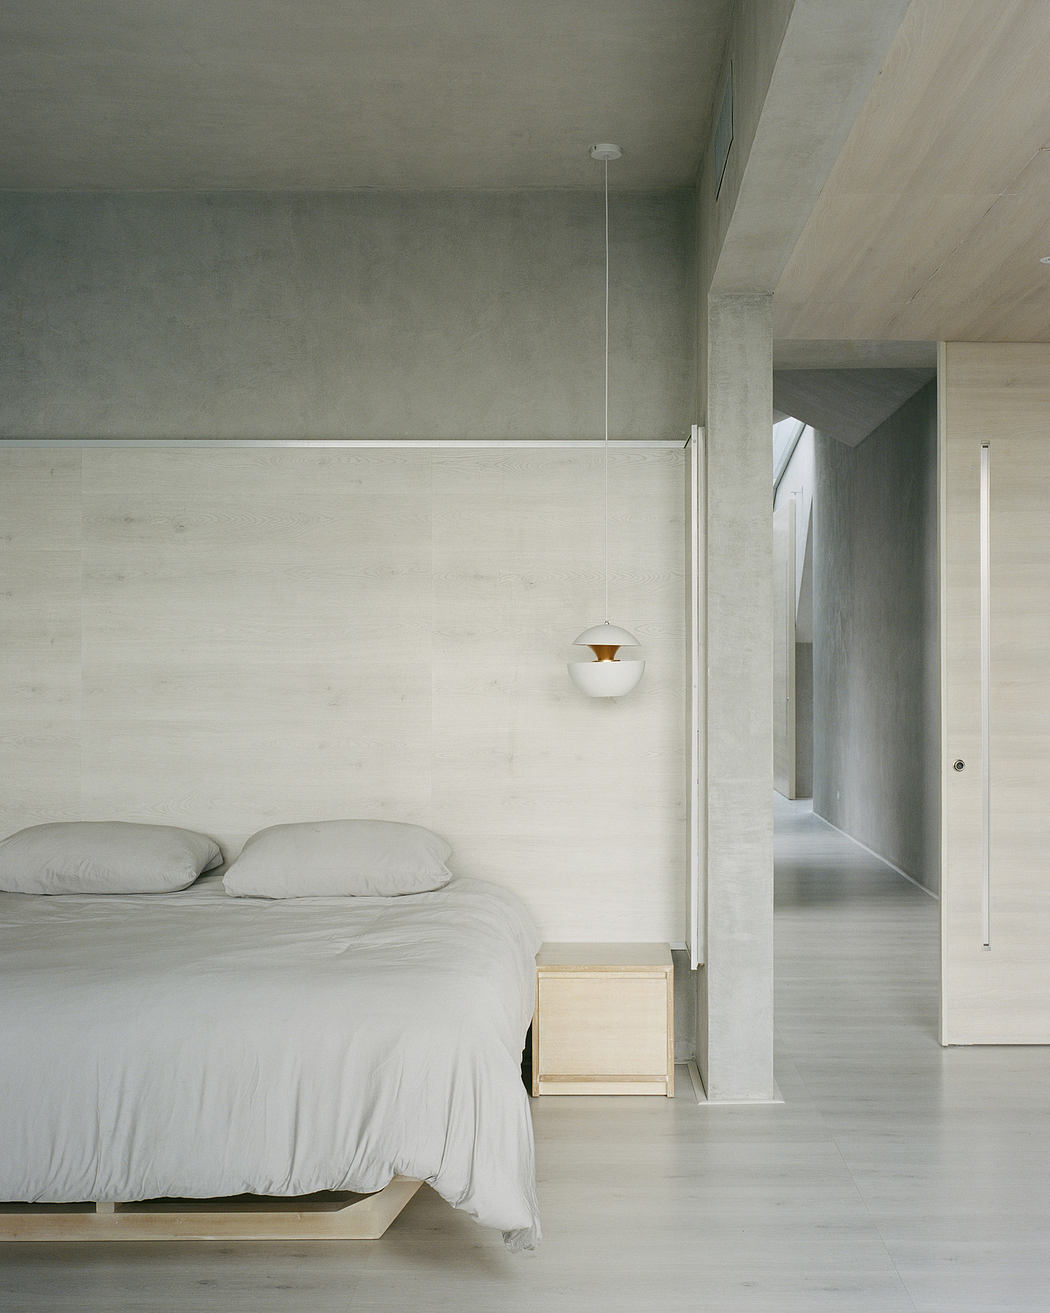 Minimalist bedroom with concrete walls, wooden accents, and simple bedding.